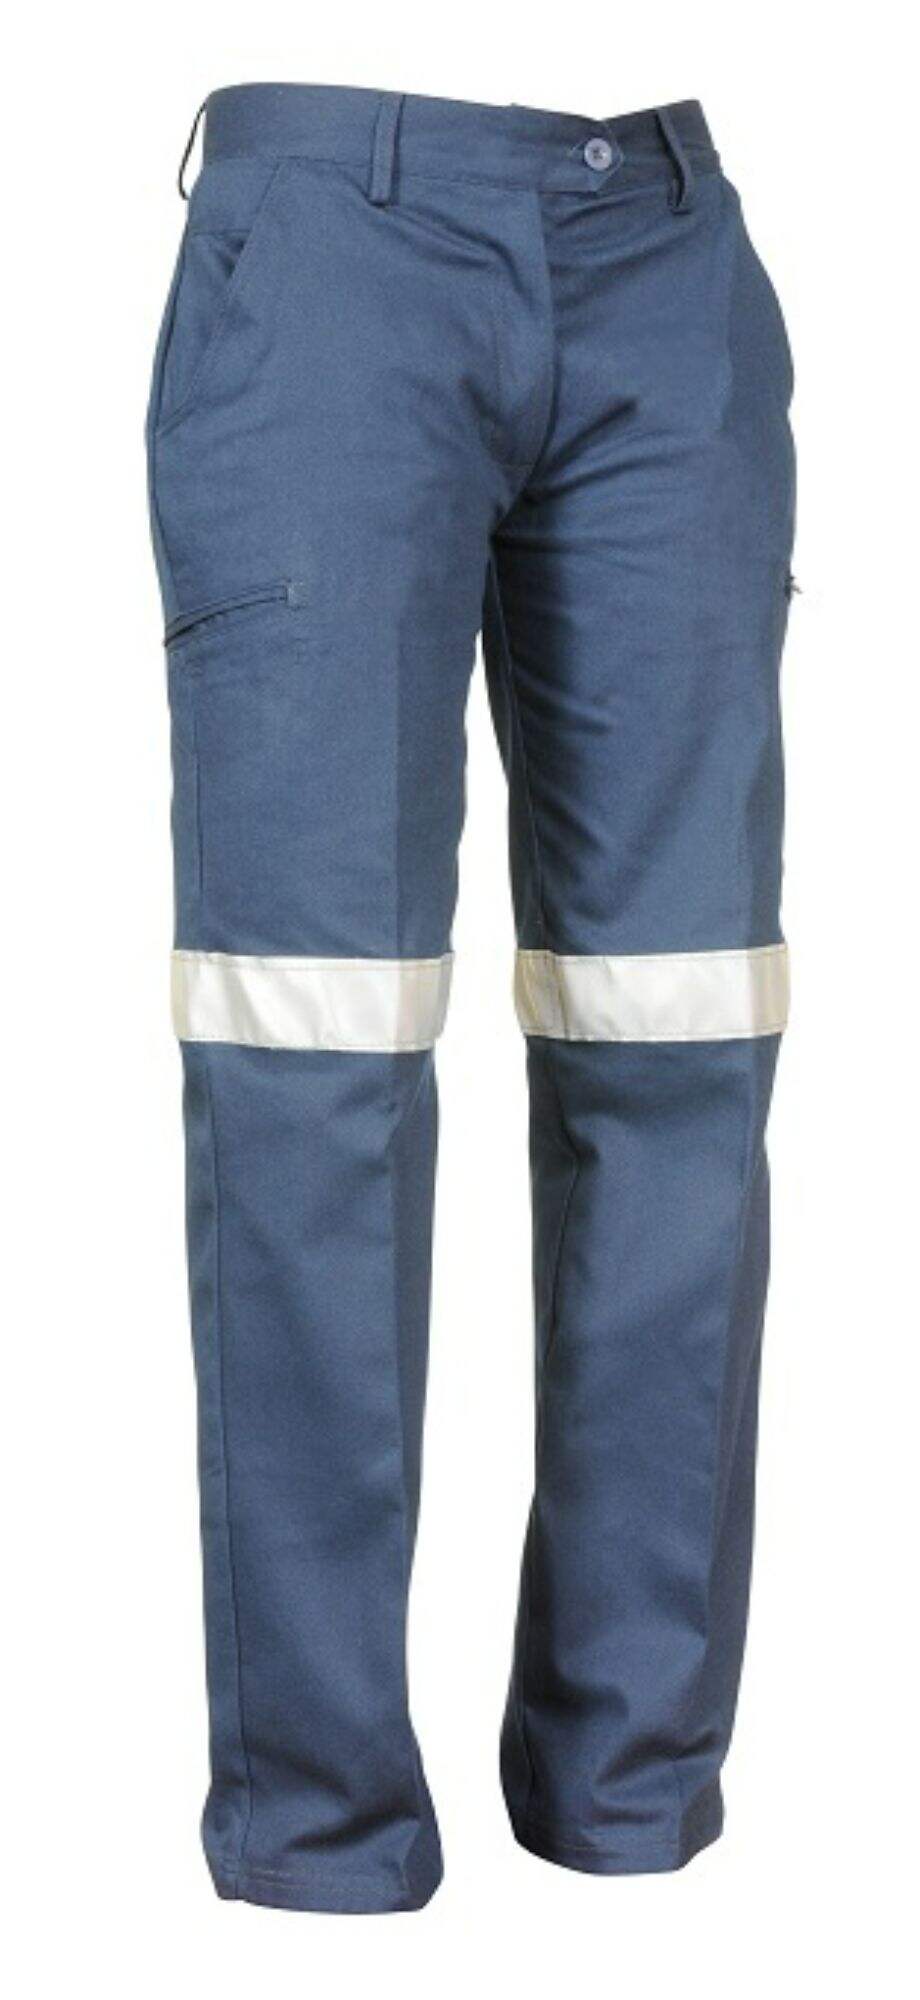 High Quality Durable Waterproof   Cargo Hi Vis Reflective  Trousers With Tapes On The Knee